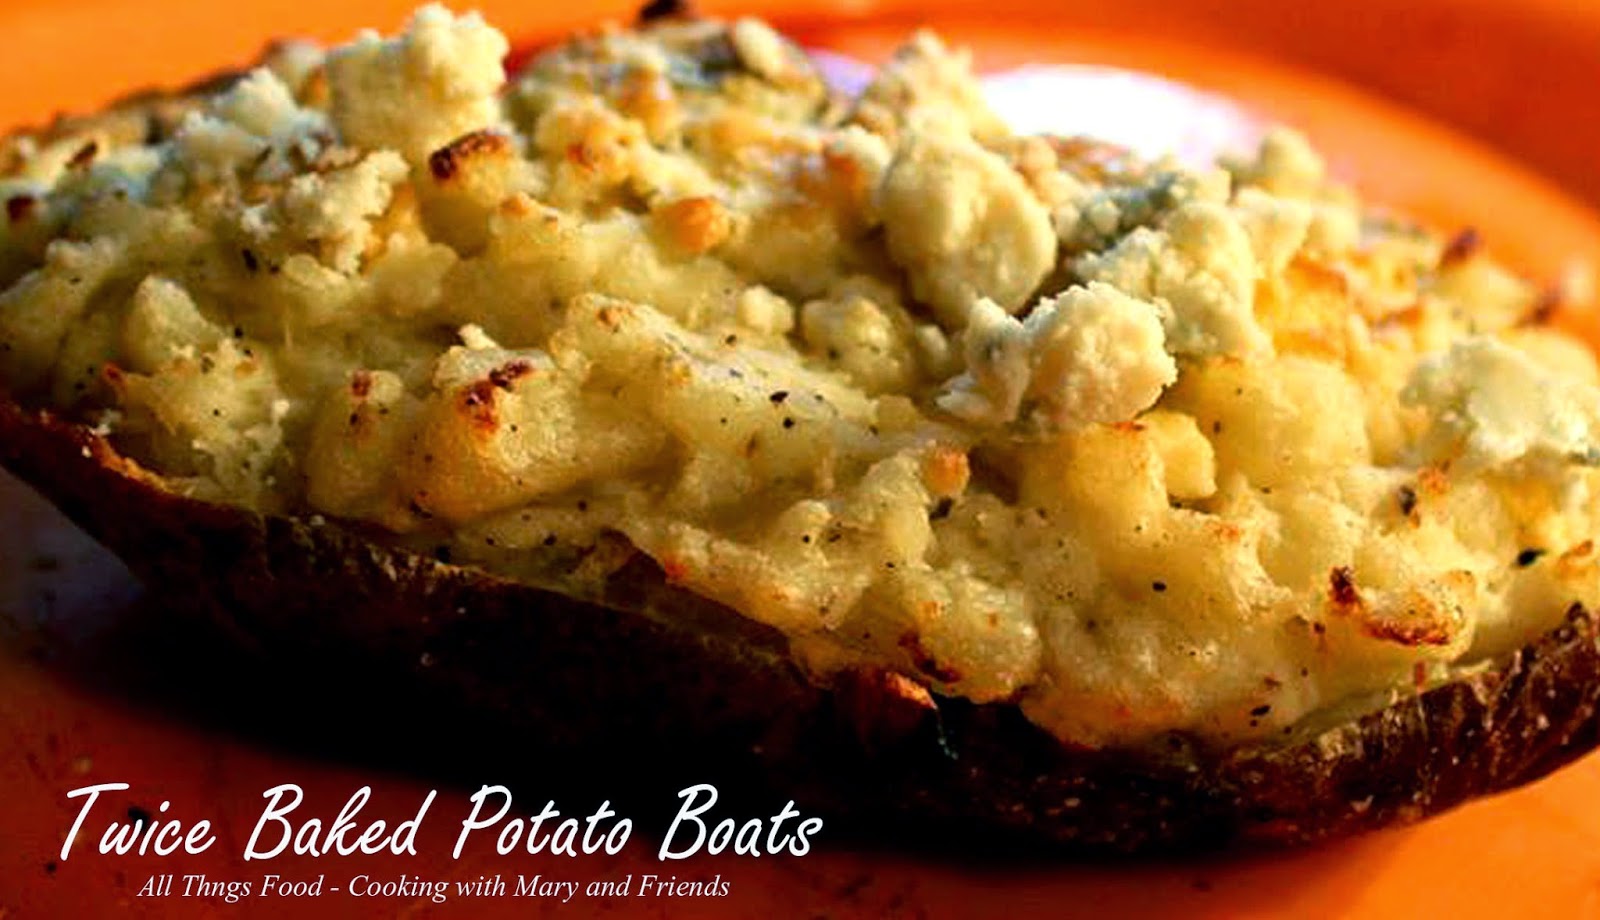 Cooking With Mary and Friends: Twice Baked Potato Boats